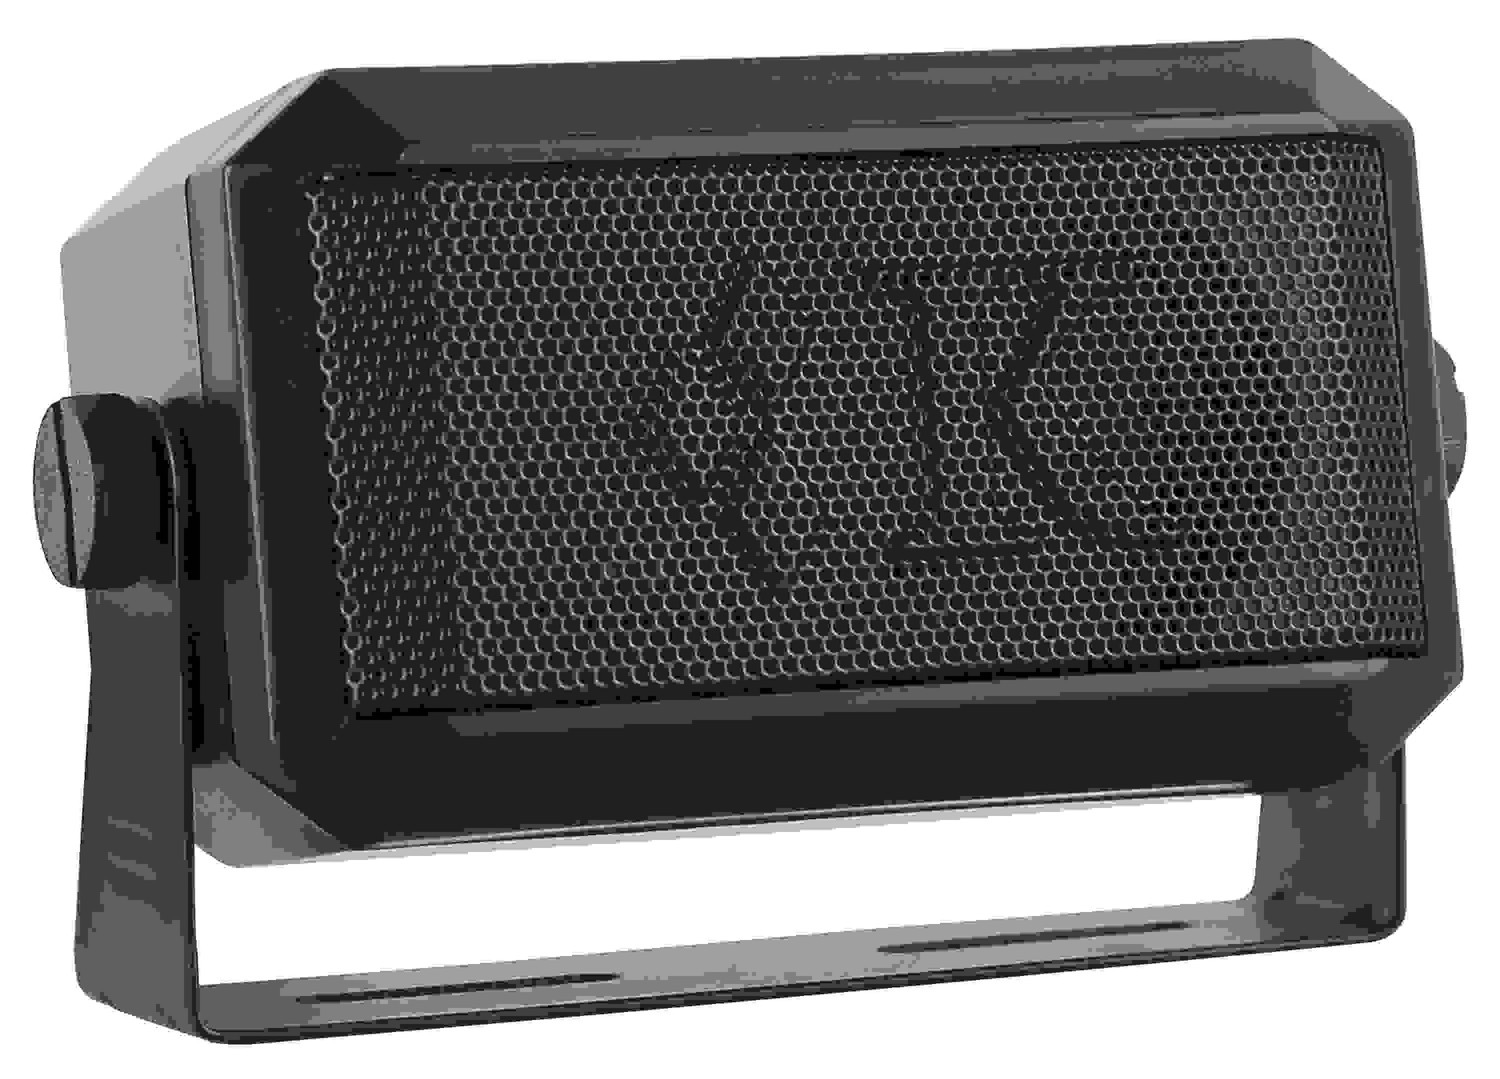 Kalibur - Deluxe External Speaker With Mesh Grill, 10' Cable With 3.5Mm Plug